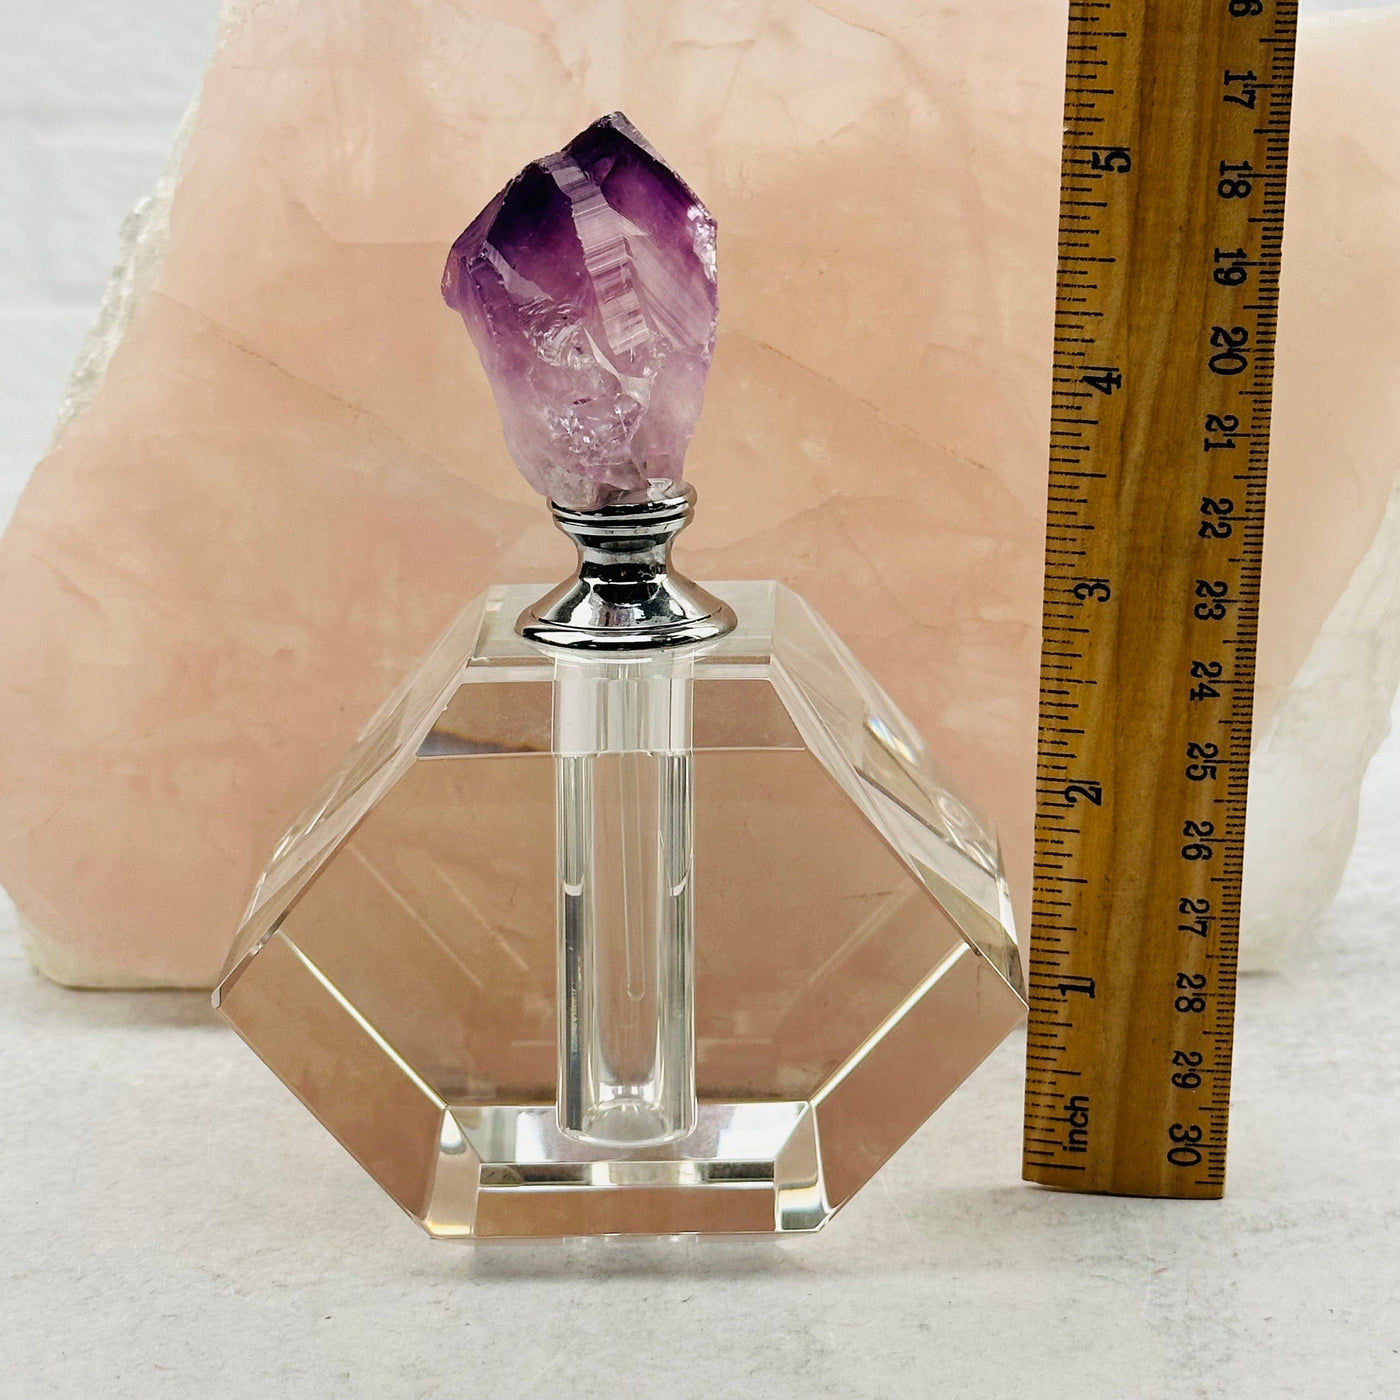 perfume bottle next to a ruler for size reference 